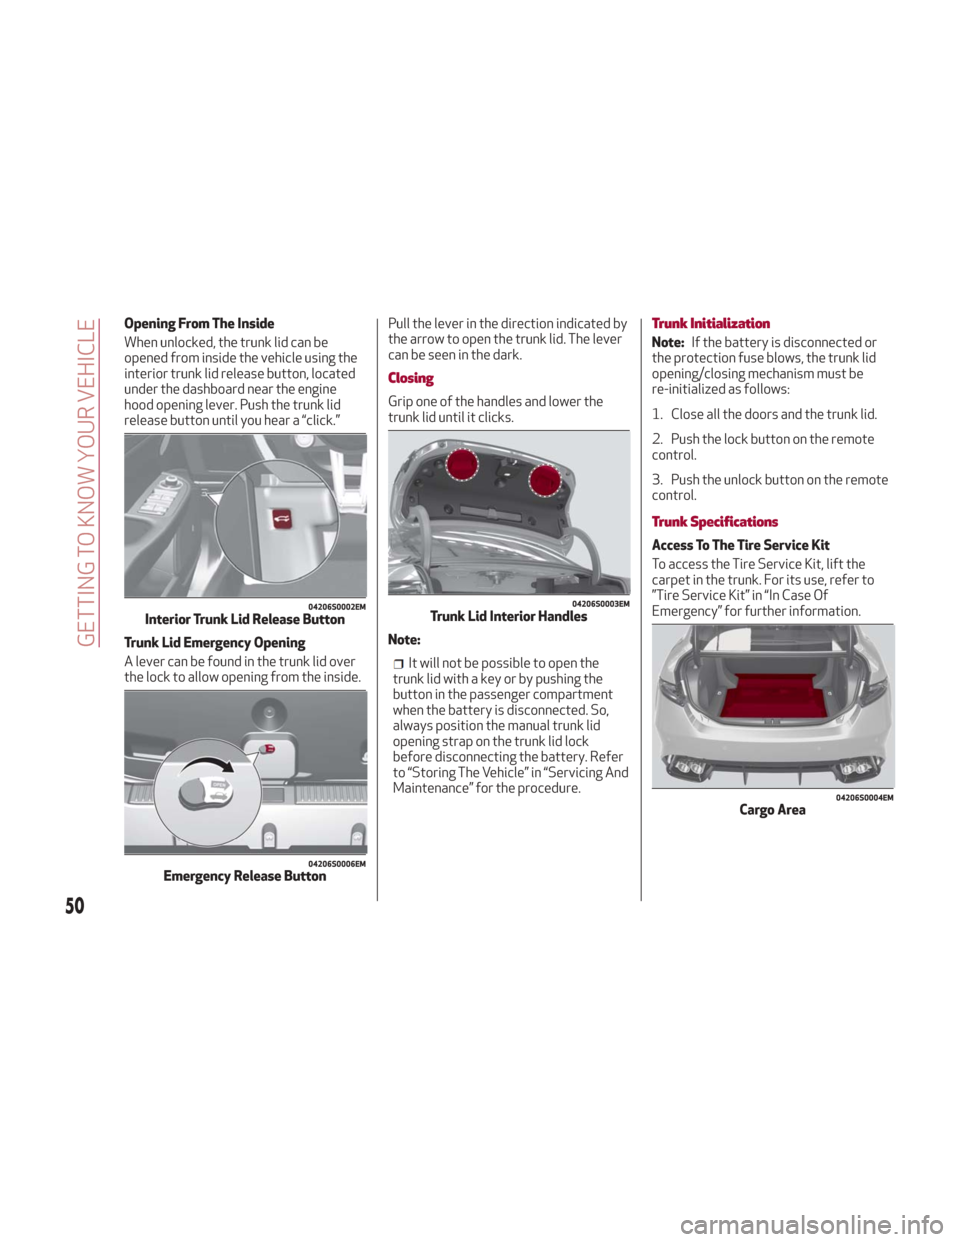 Alfa Romeo Giulia 2018 User Guide Opening From The Inside
When unlocked, the trunk lid can be
opened from inside the vehicle using the
interior trunk lid release button, located
under the dashboard near the engine
hood opening lever. 